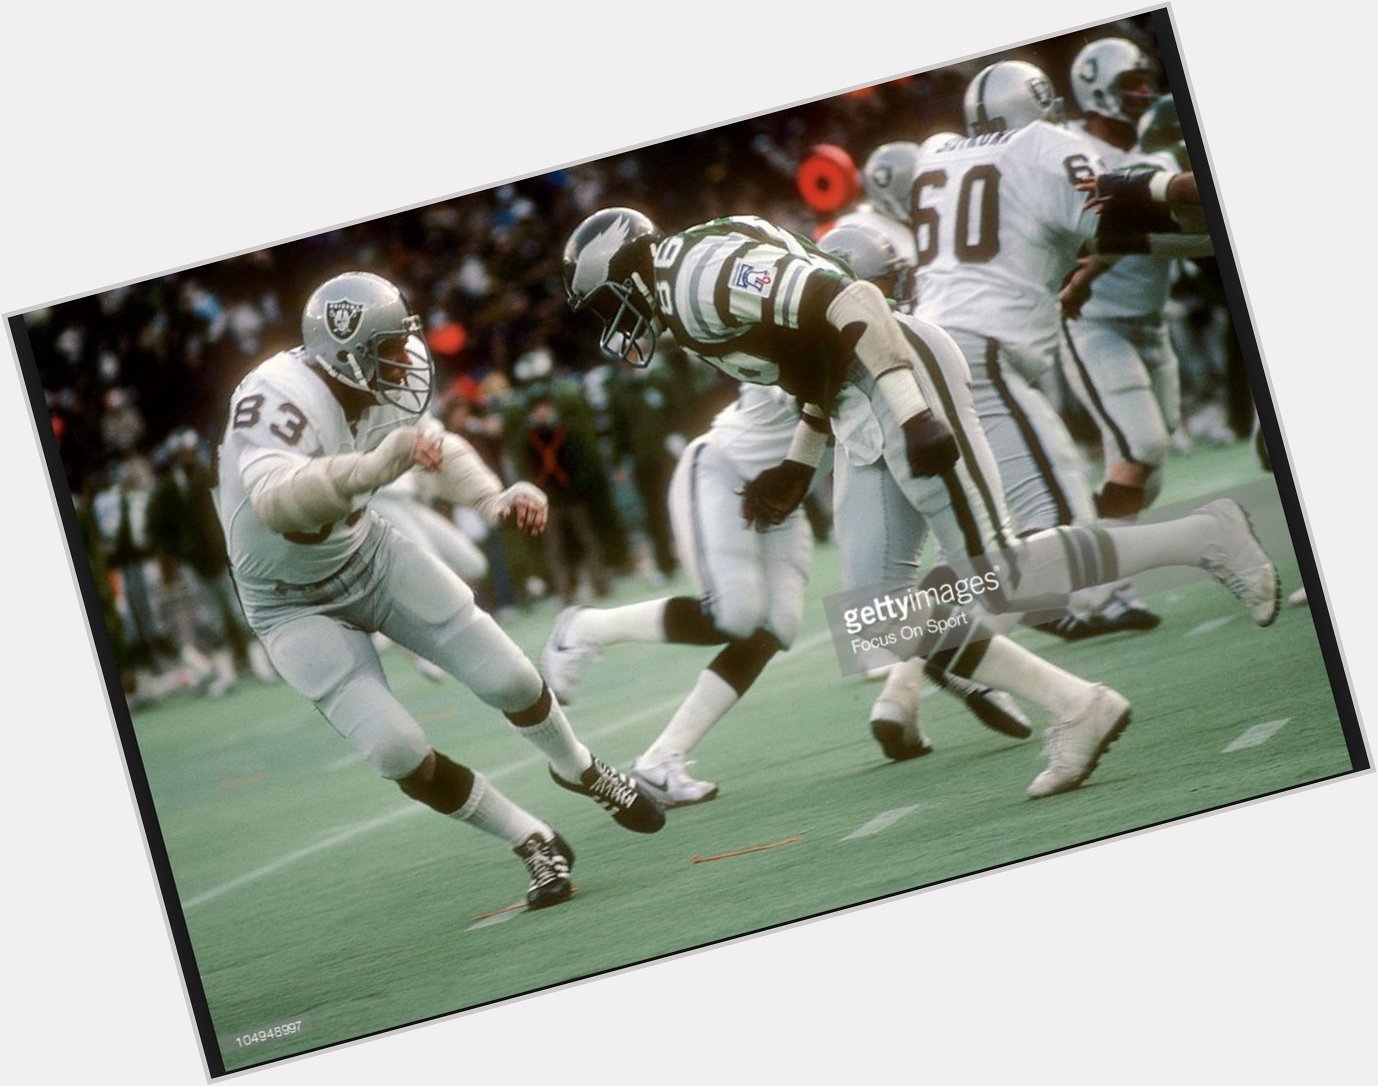 70 years old today. 8X Pro Bowler & 4X All Pro Linebacker. Happy birthday to the Hall-of-Famer, Ted Hendricks! 